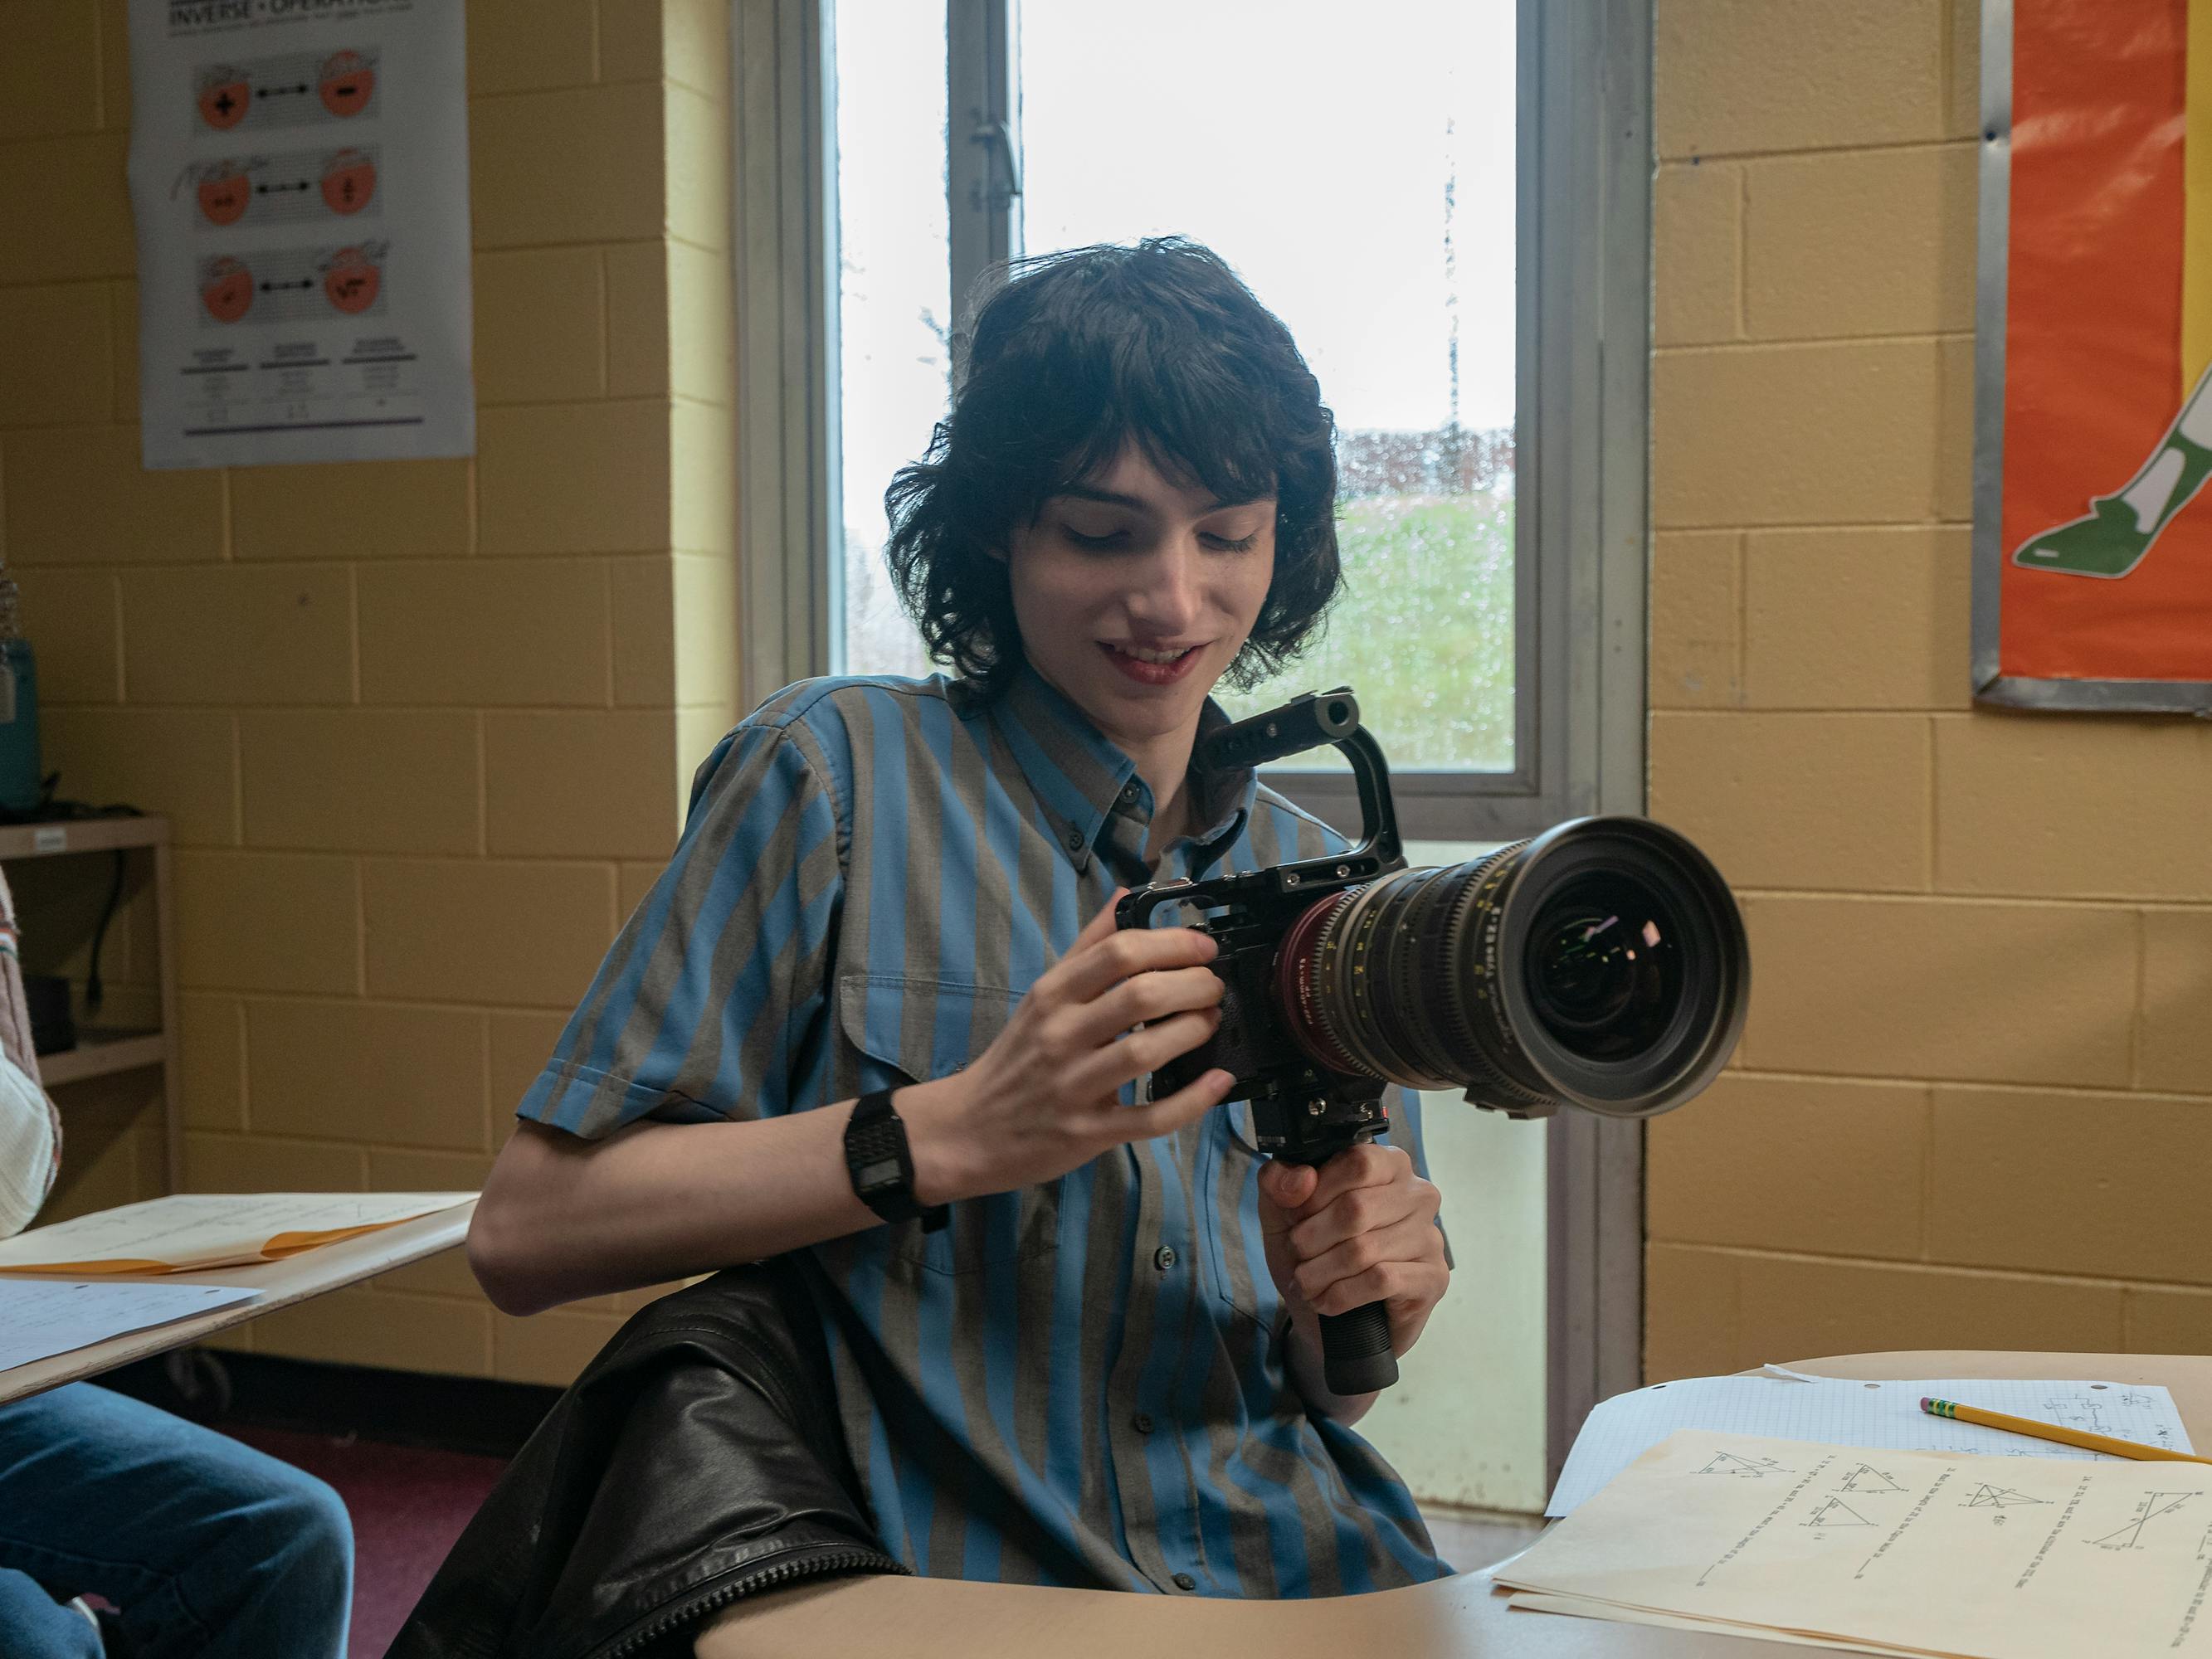 Mike Wheeler (Finn Wolfhard) wears a blue shirt and holds a huge camera on his desk.